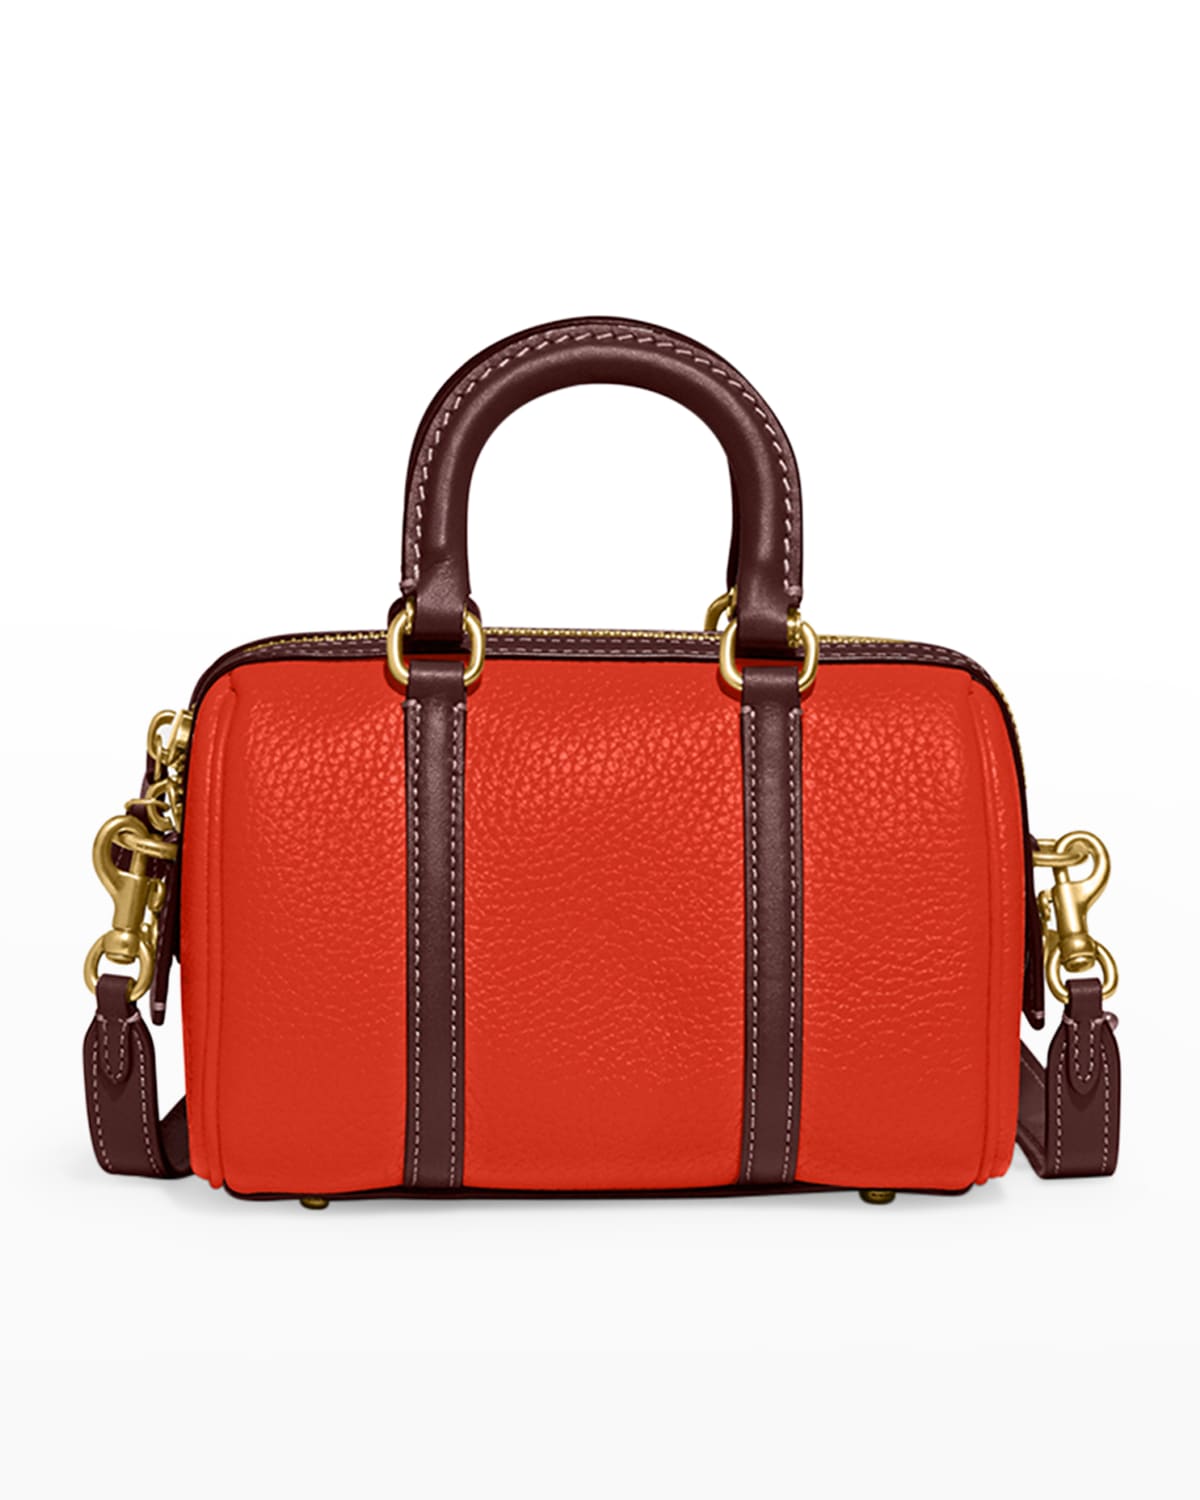 Rogue Colorblock Pebbled Leather Satchel Bag In Red Orange